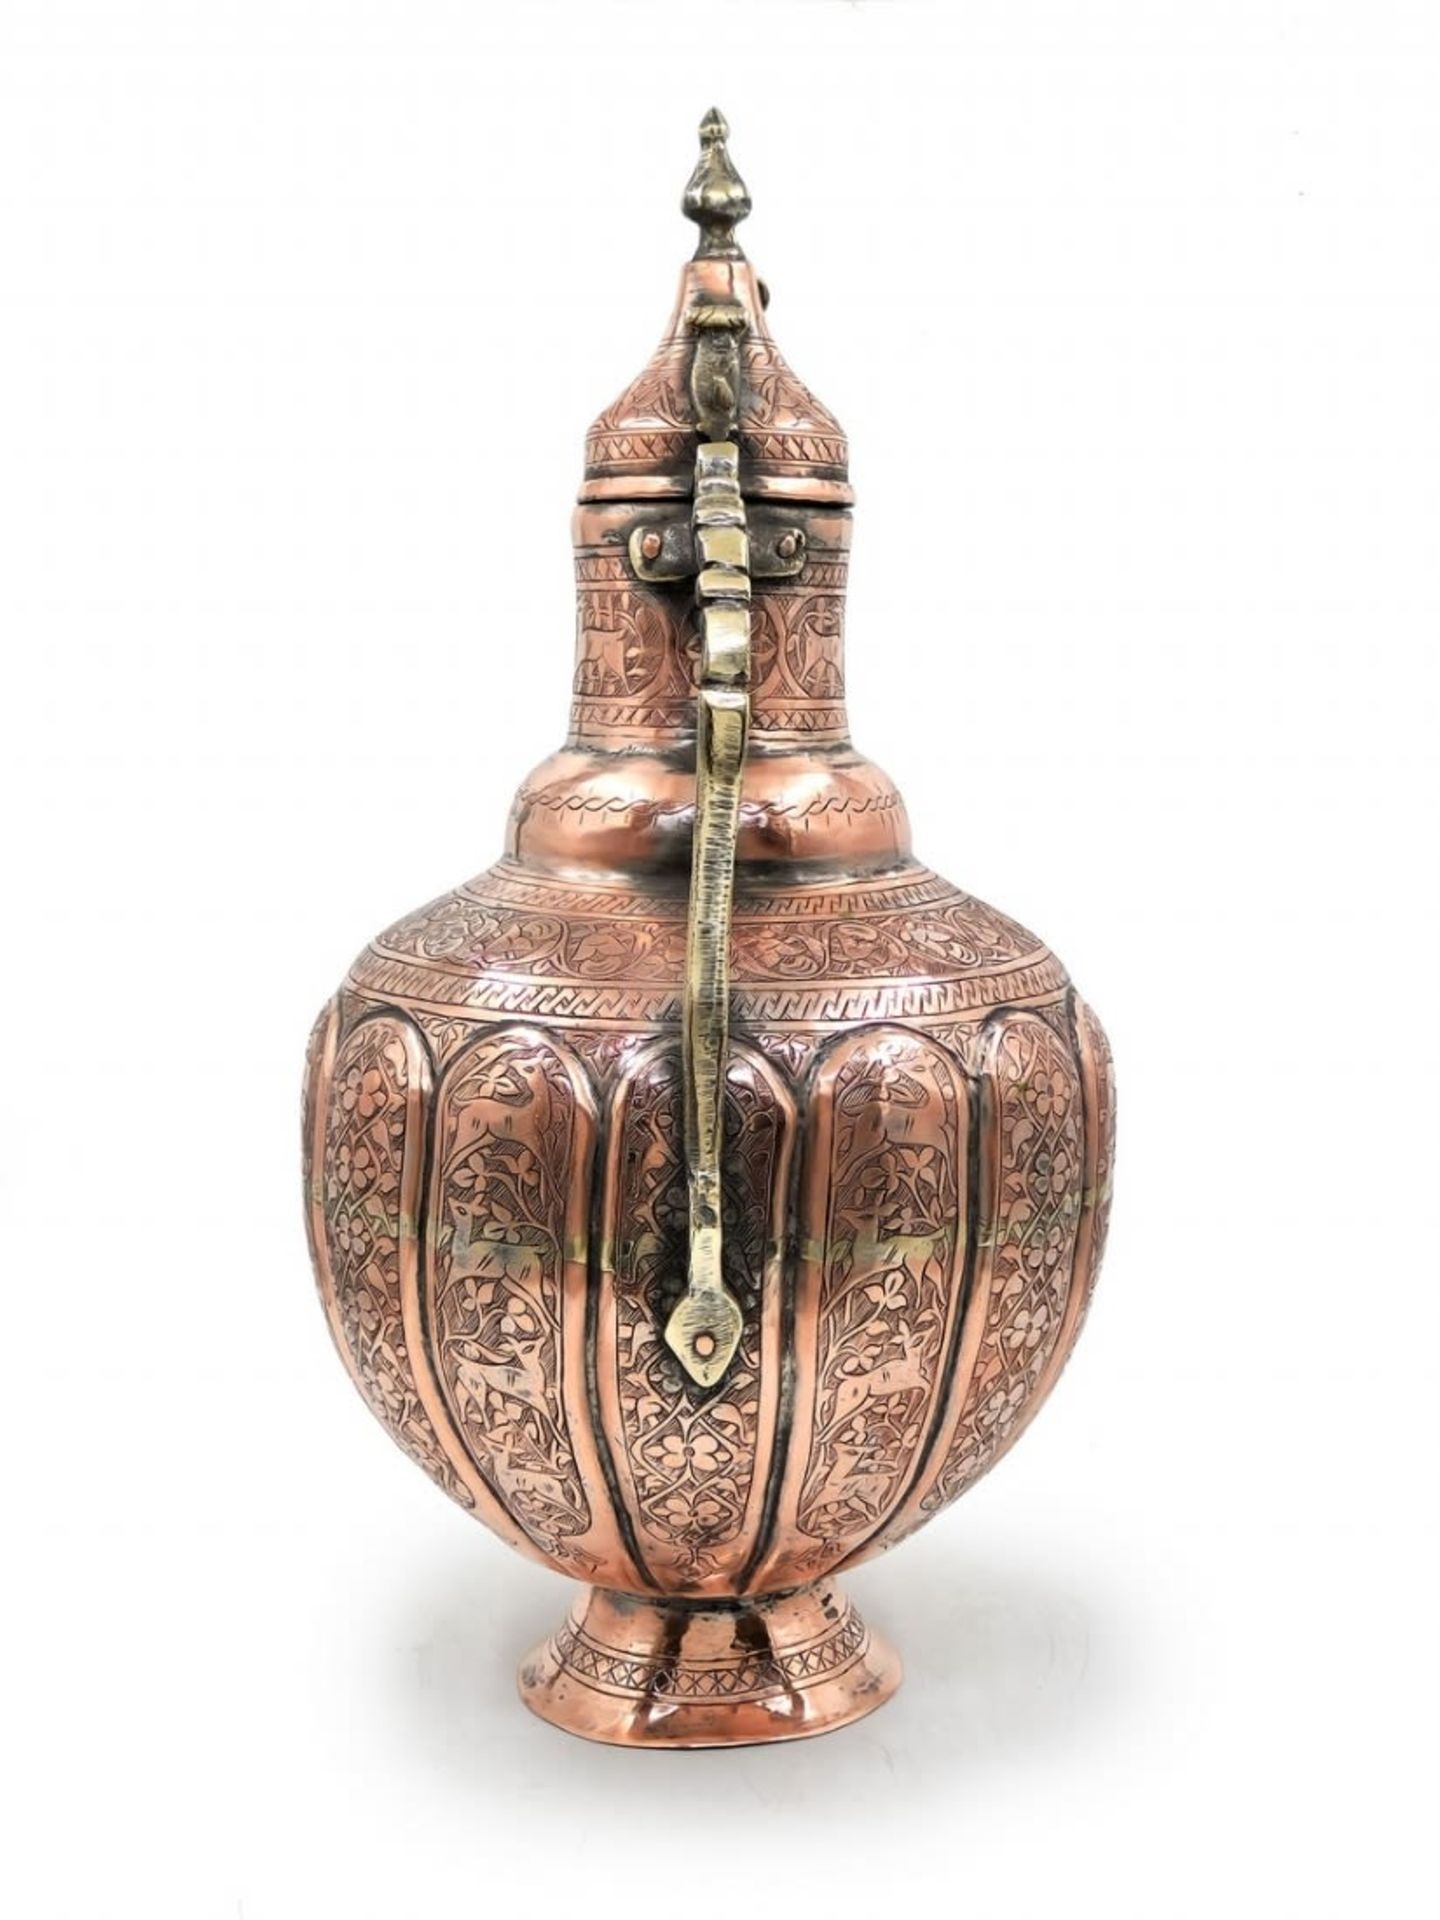 An antique Persian vessel, from the Qajar Dynasty period, made of copper and brass and decorated - Image 2 of 9